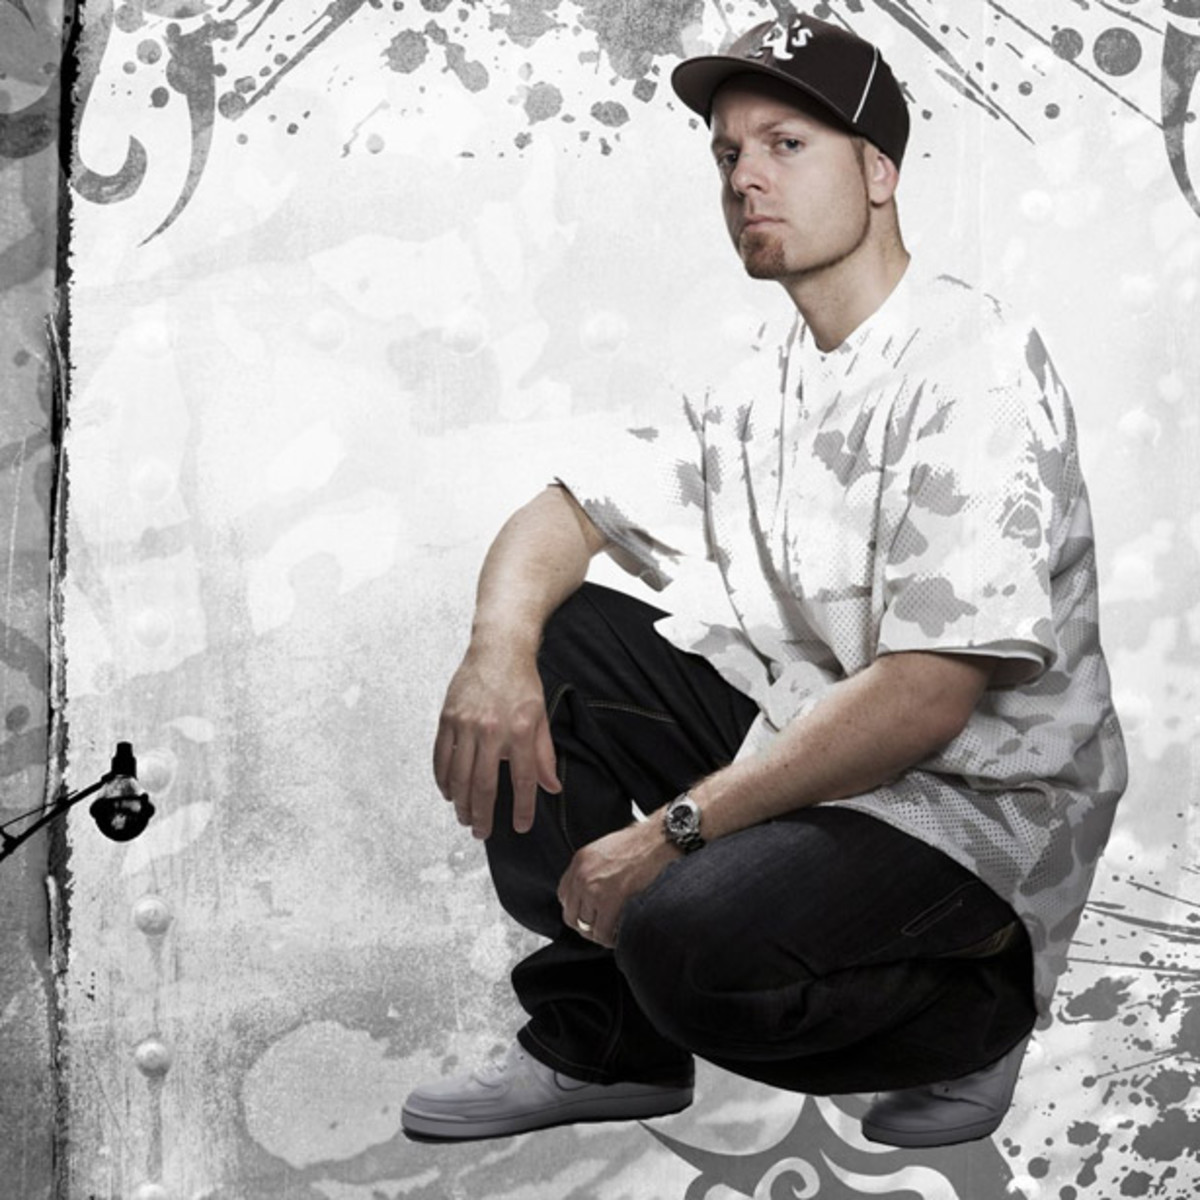 DJ Shadow Vows To Upload The Set That Got Him Booted Off The Decks In Miami